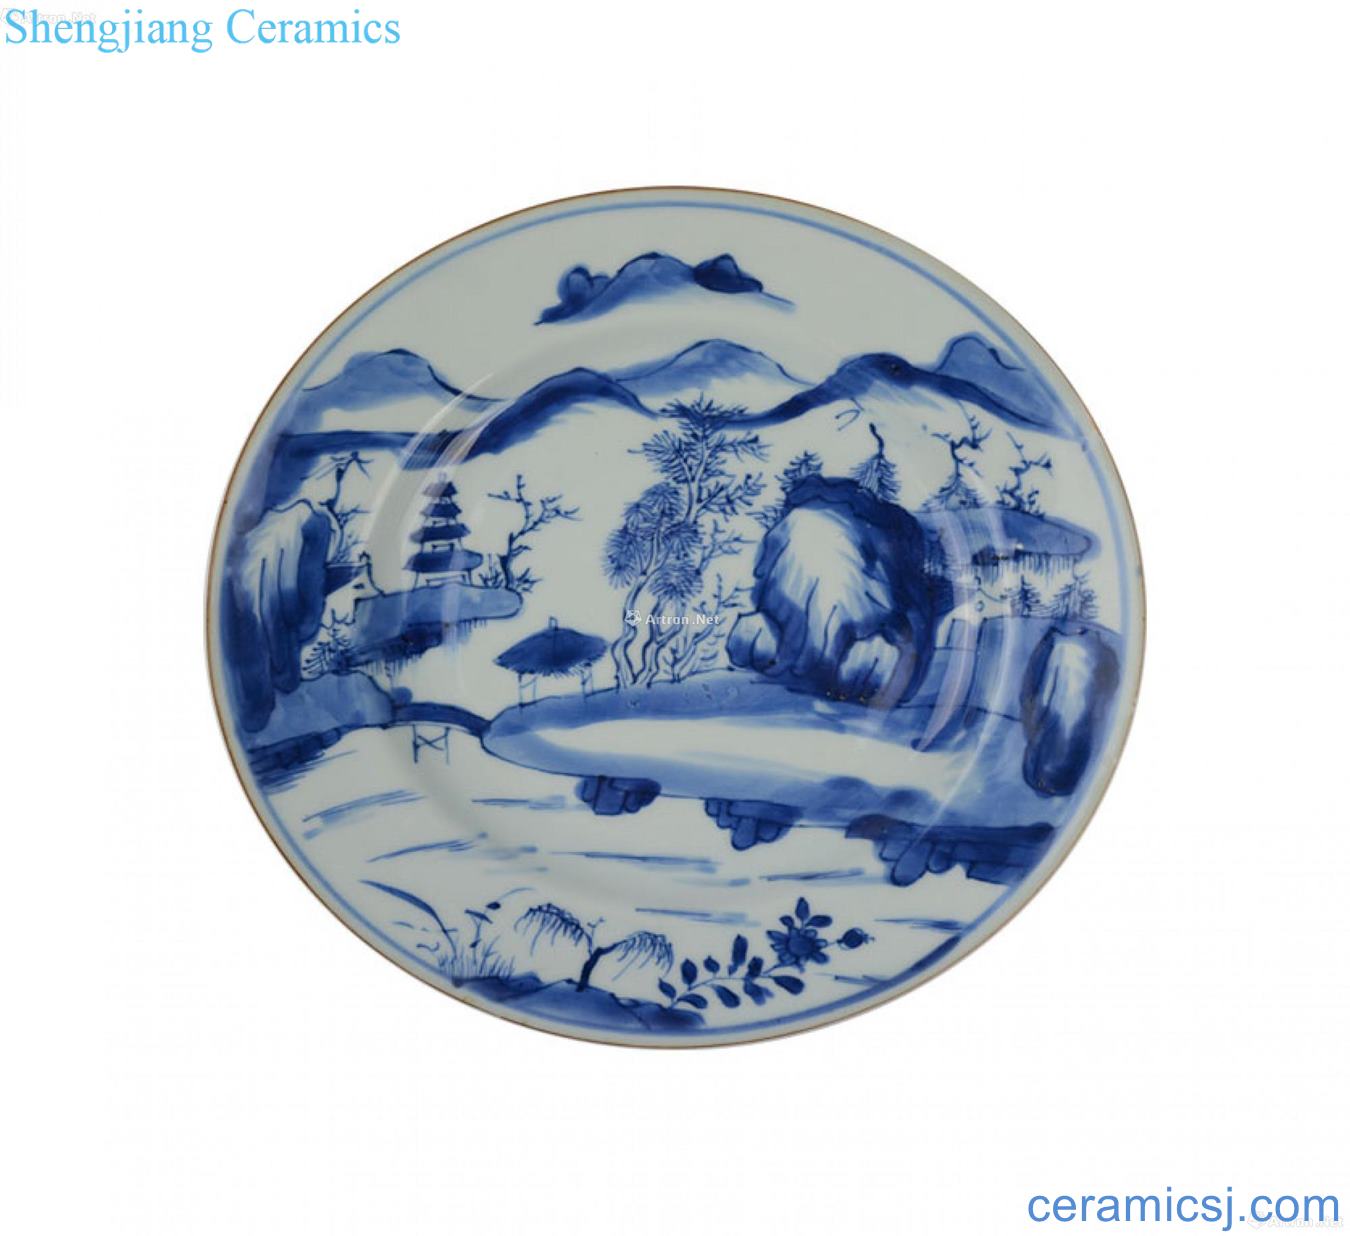 Blue and white landscape tray